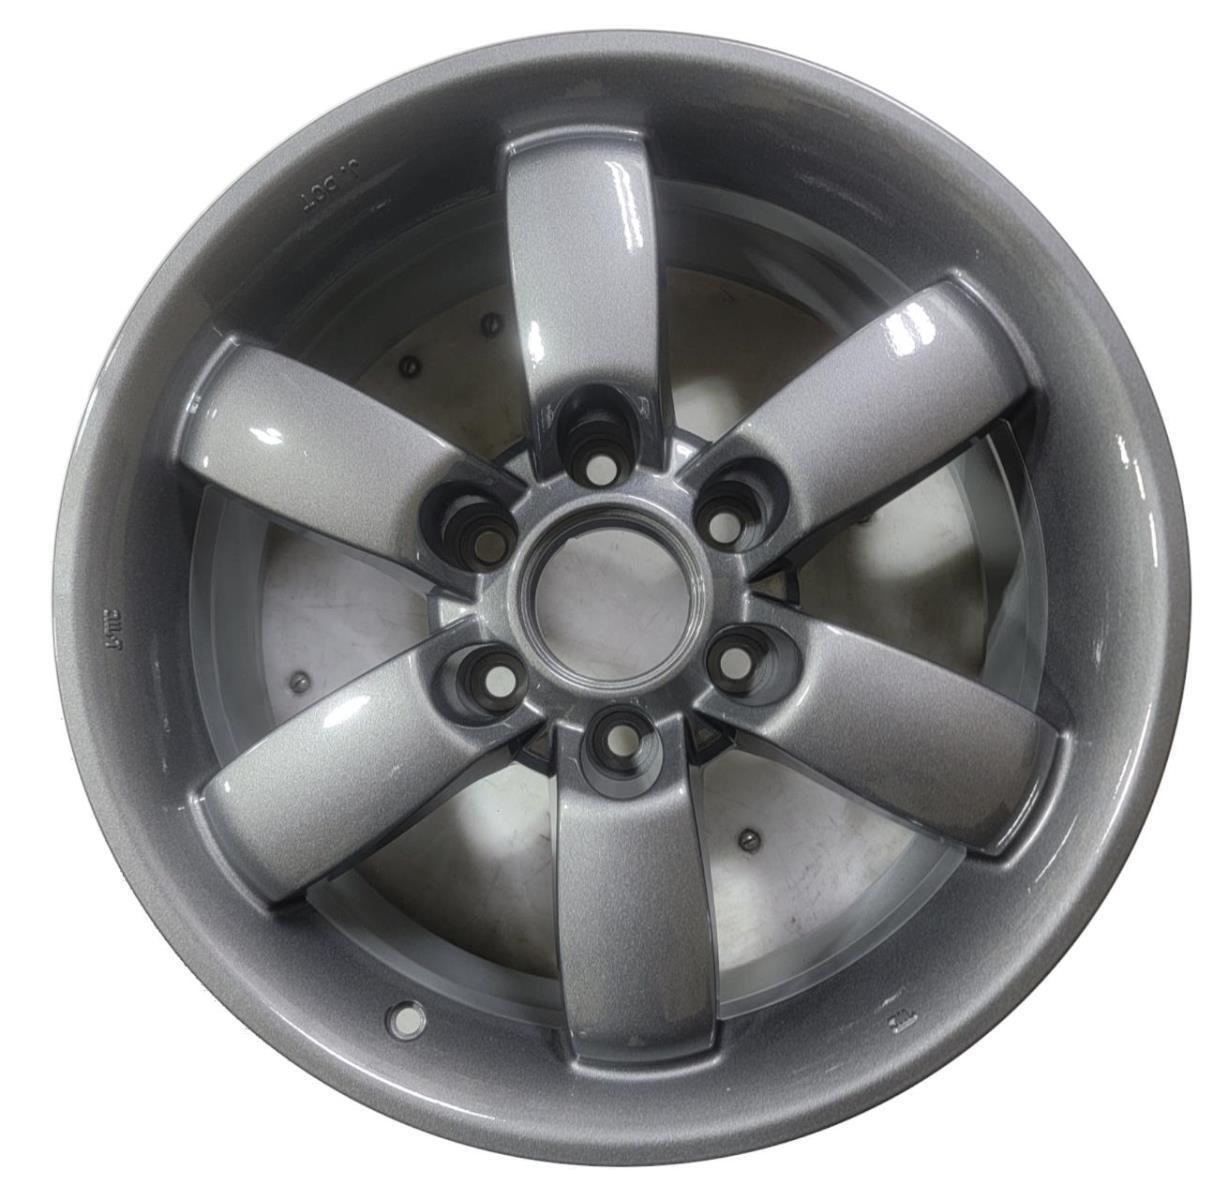 (1) Wheel Rim For Titan Recon OEM Nice Charcoal Painted